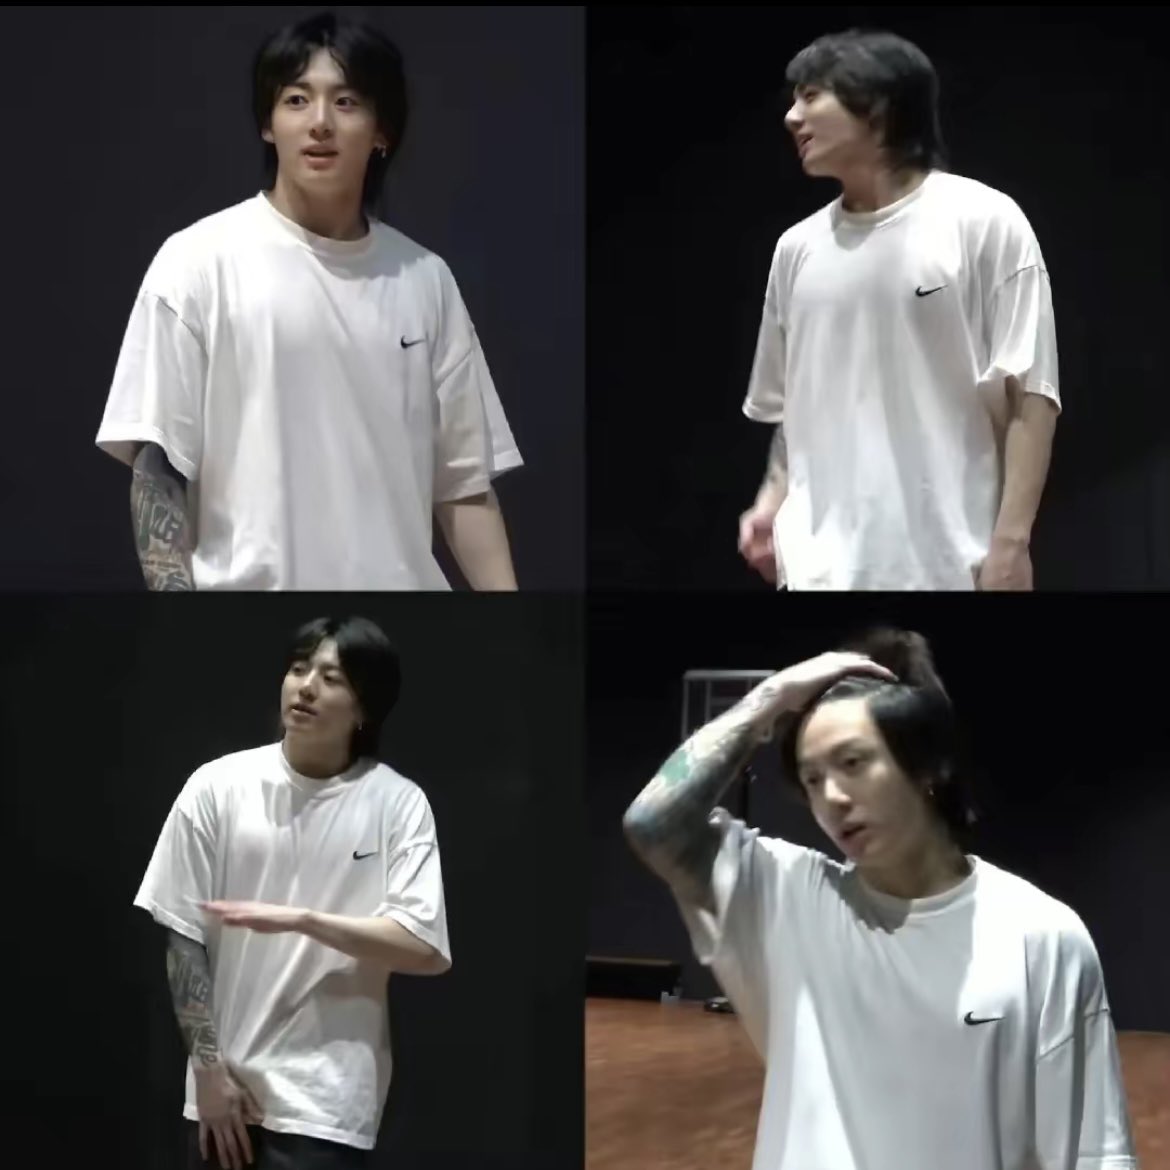 Jungkook with no makeup is the finest of them all 🤭😍